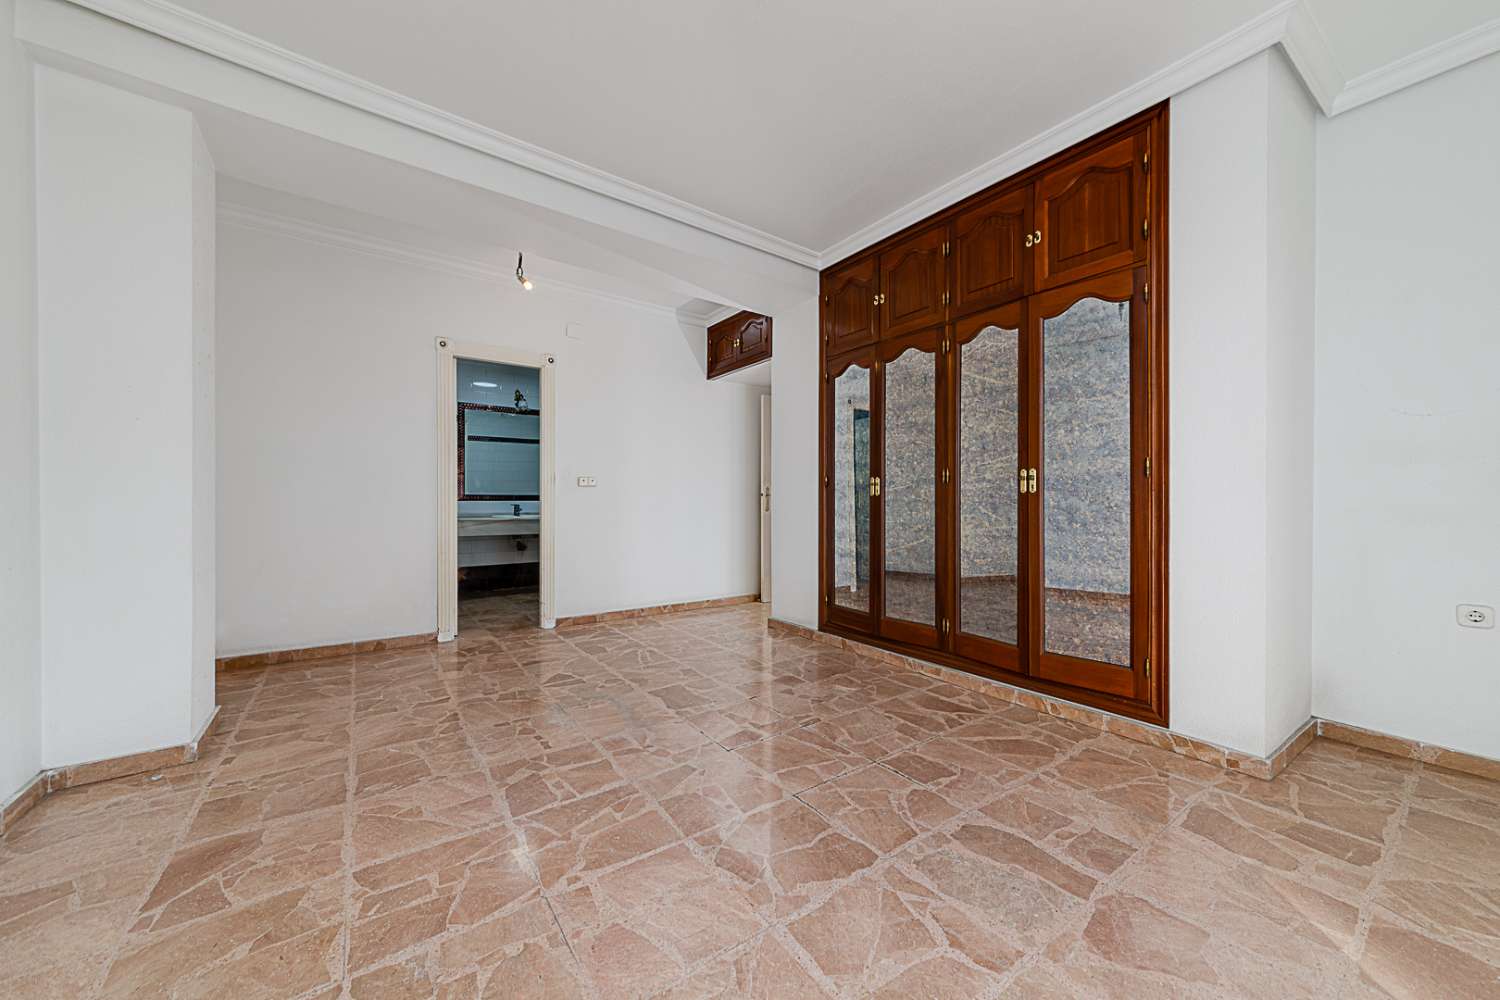 GREAT APARTMENT IN THE CENTER OF THE VILLAGE